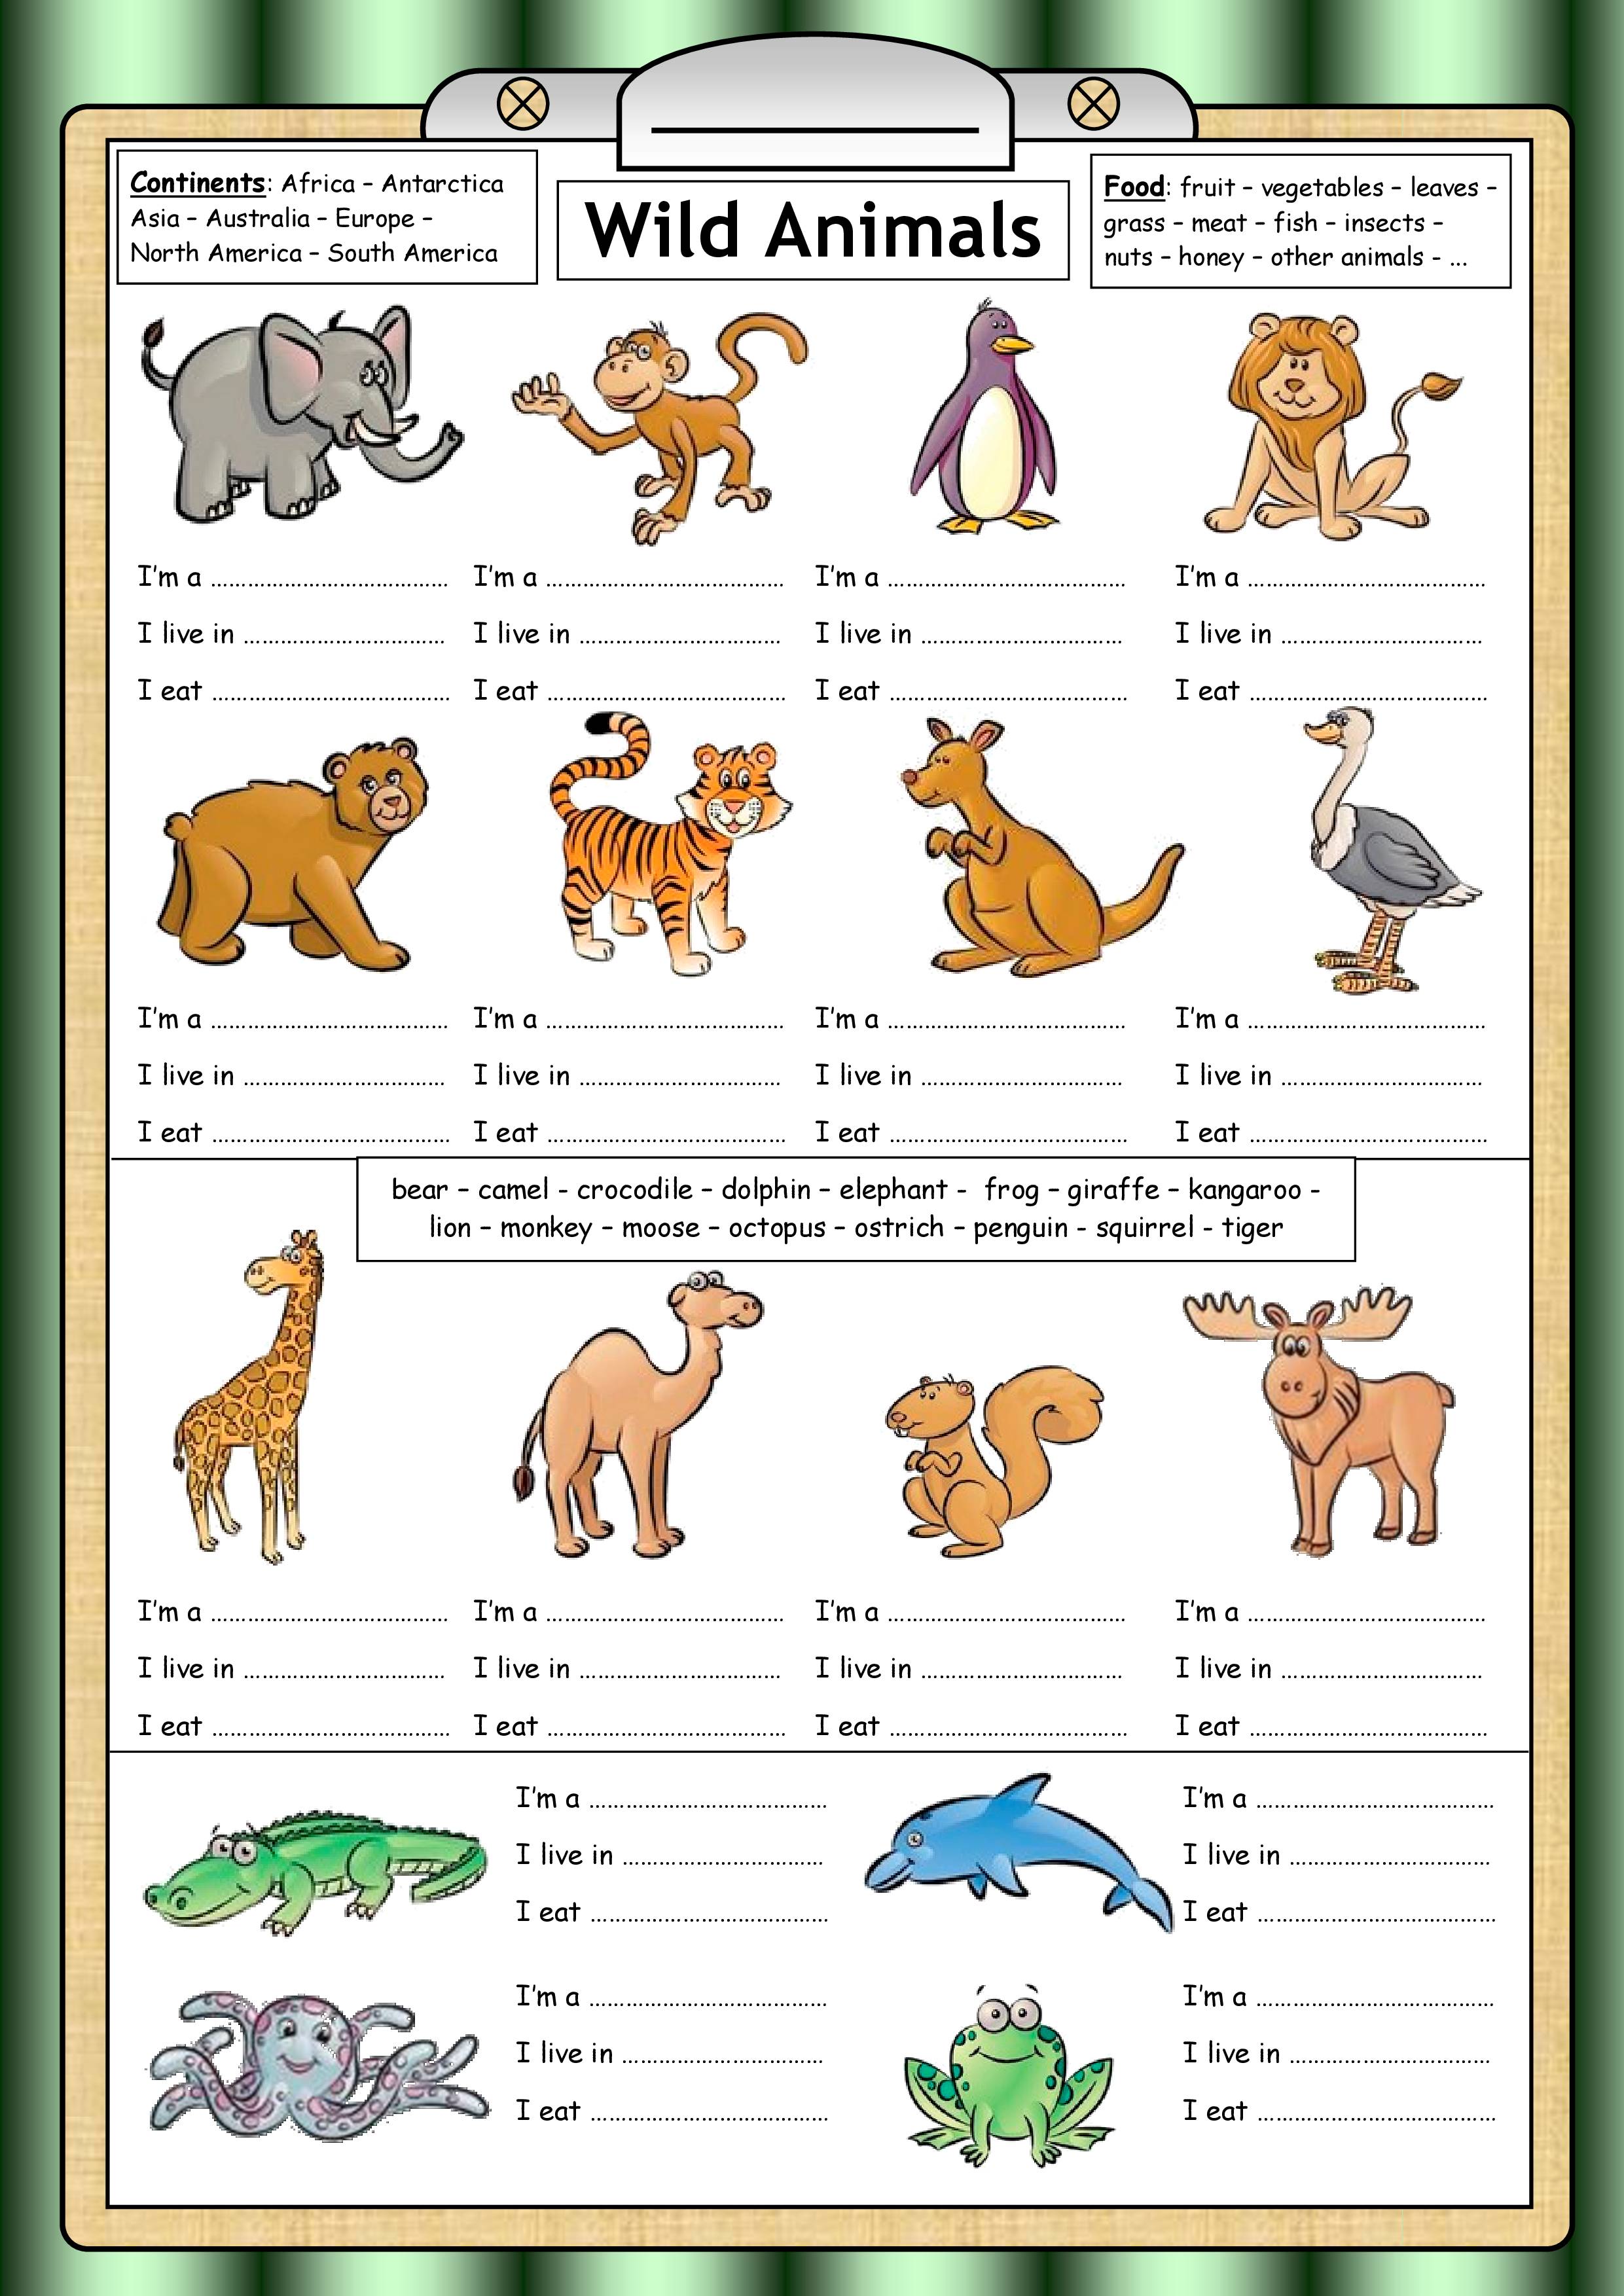 Learn About Wild Animals - Notes